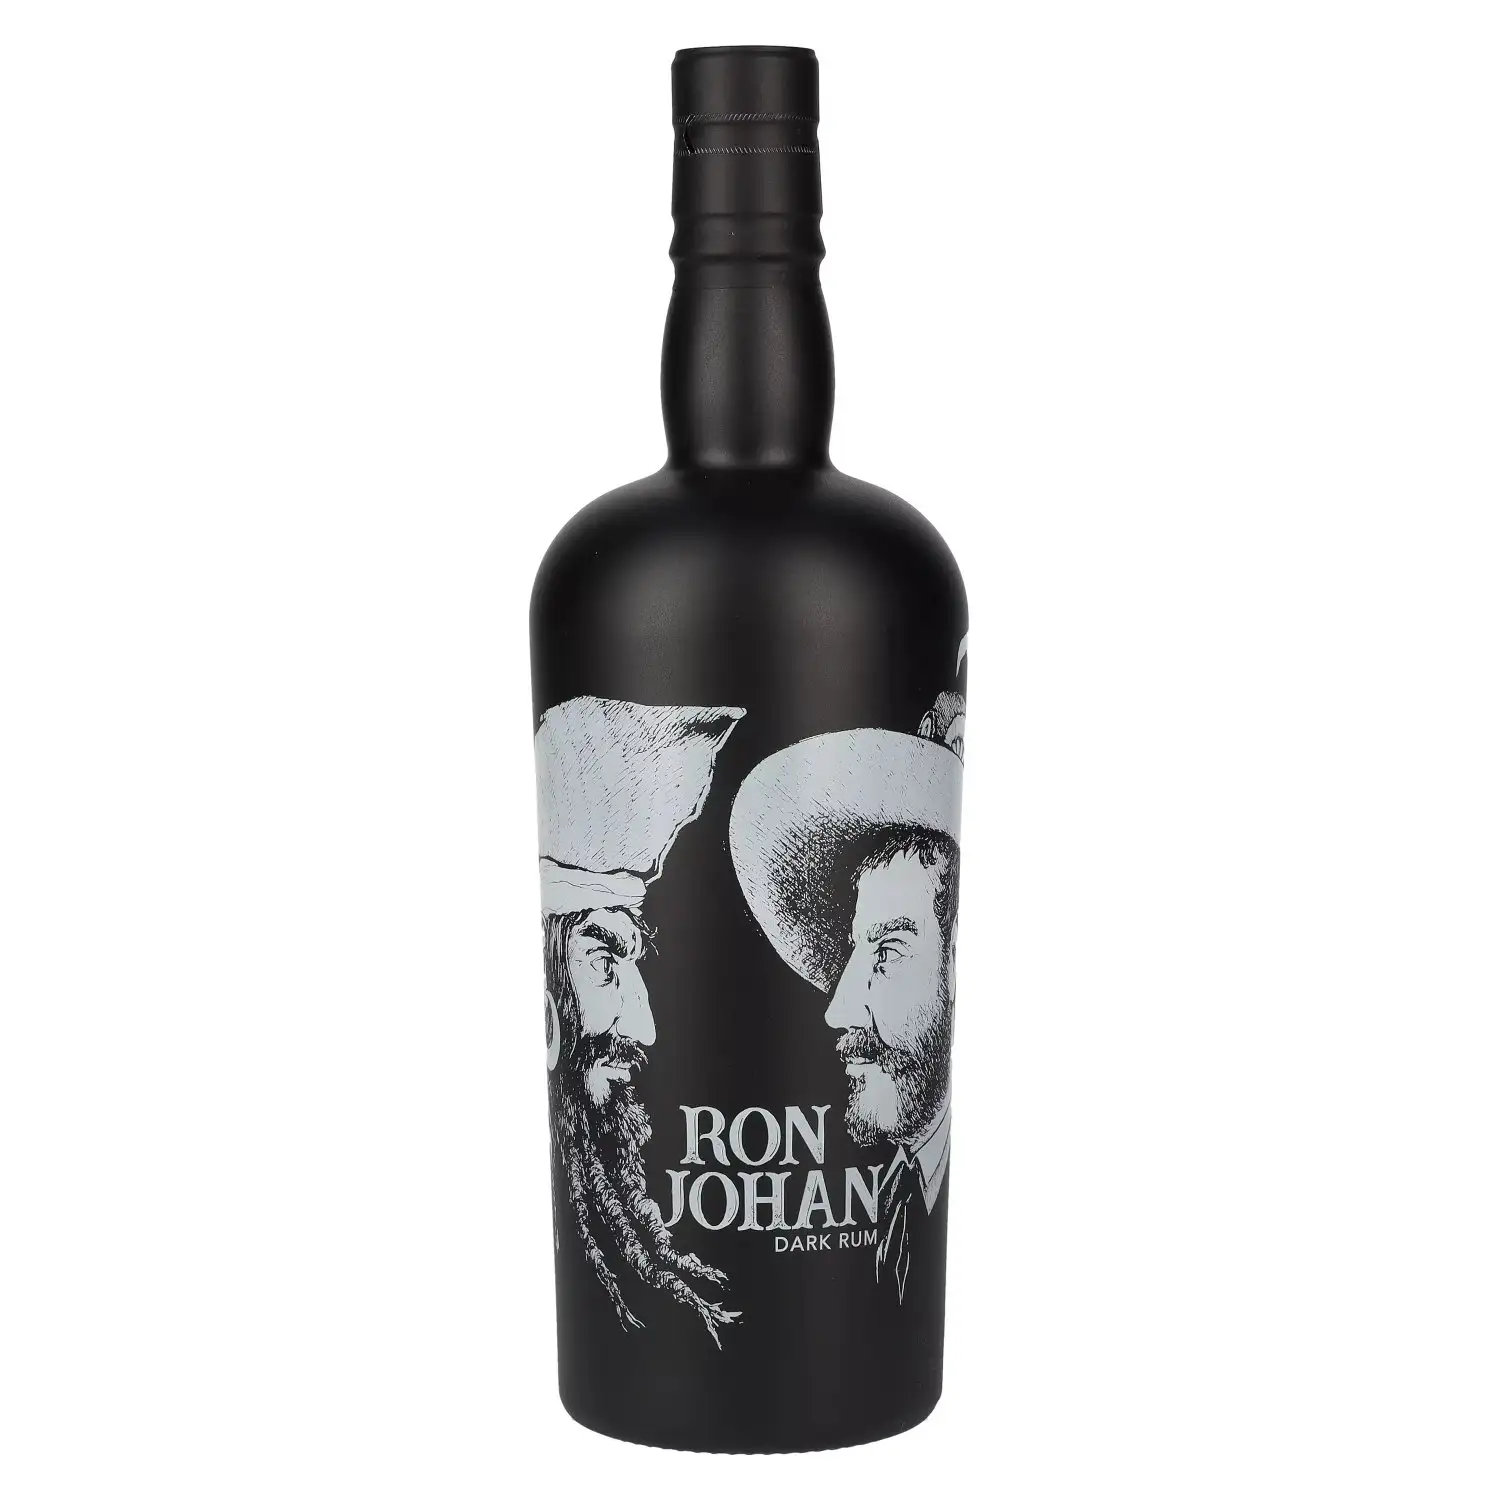 Image of the front of the bottle of the rum Ron Johan Dark Rum